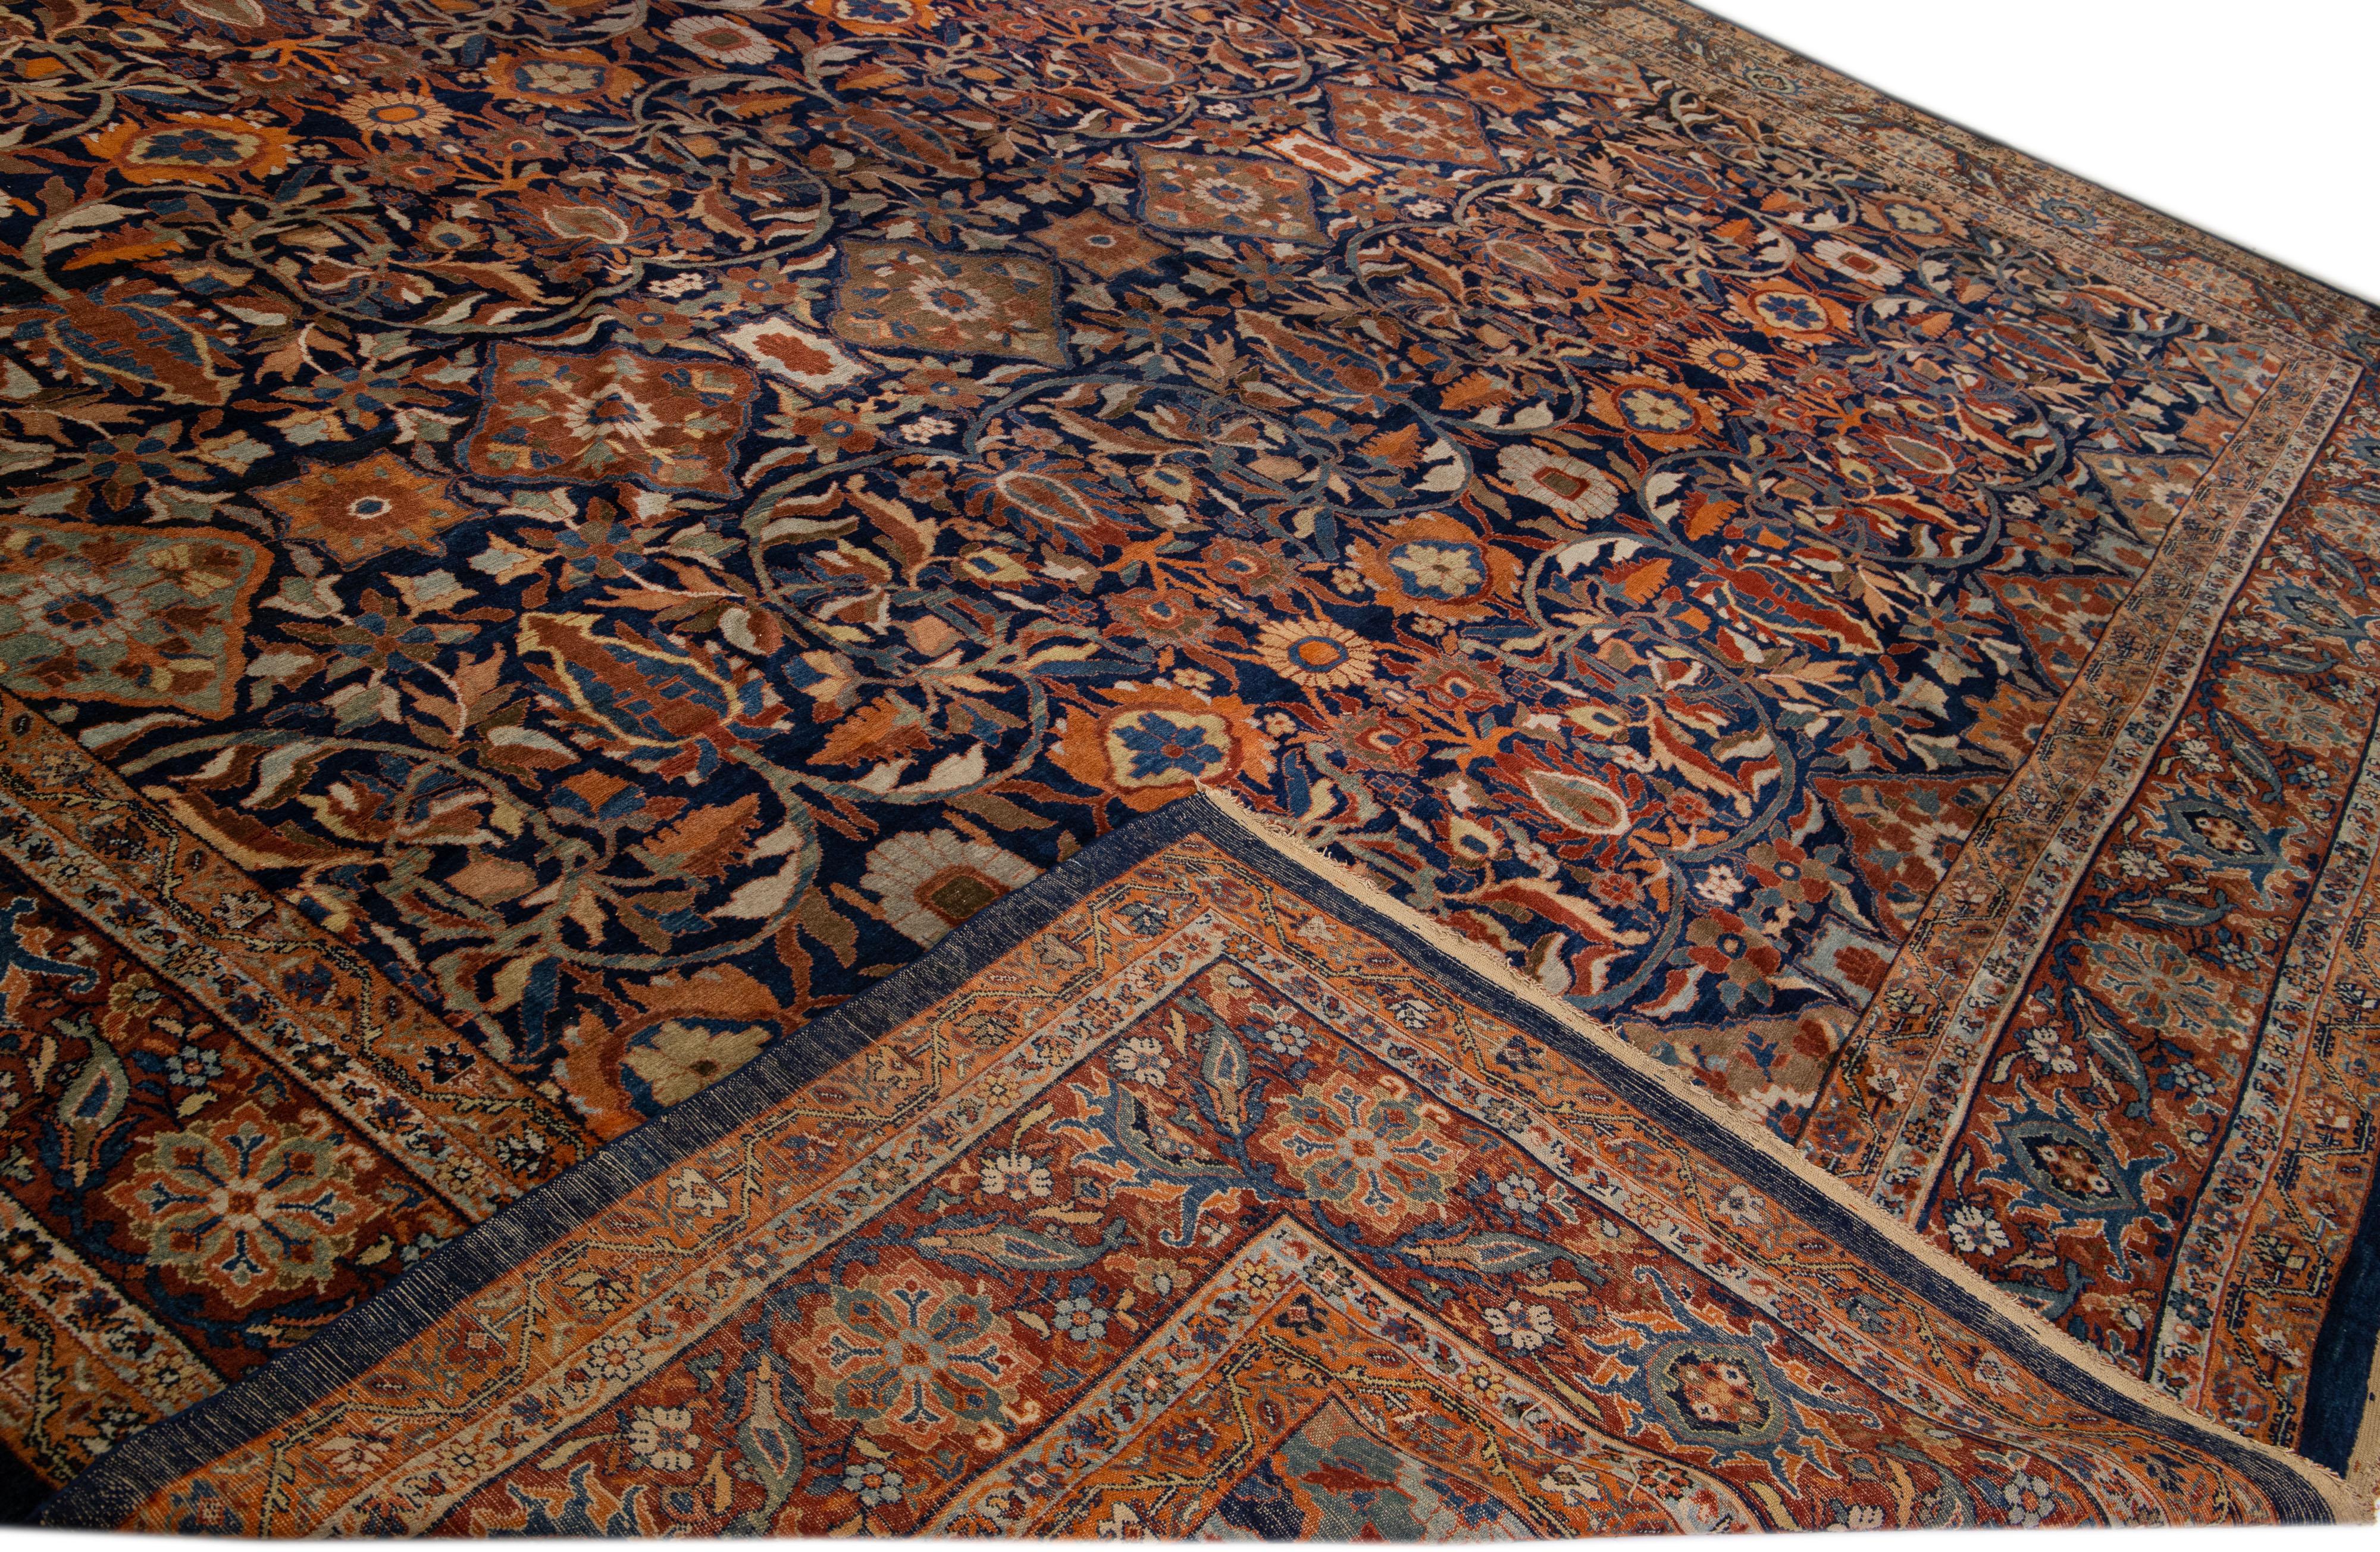 Beautiful antique Persian Sultanabad hand-knotted wool rug with a dark blue field. This piece has a red-orange color-designed frame with multicolor accents in a gorgeous all-over floral pattern design.

This rug measures: 17'3